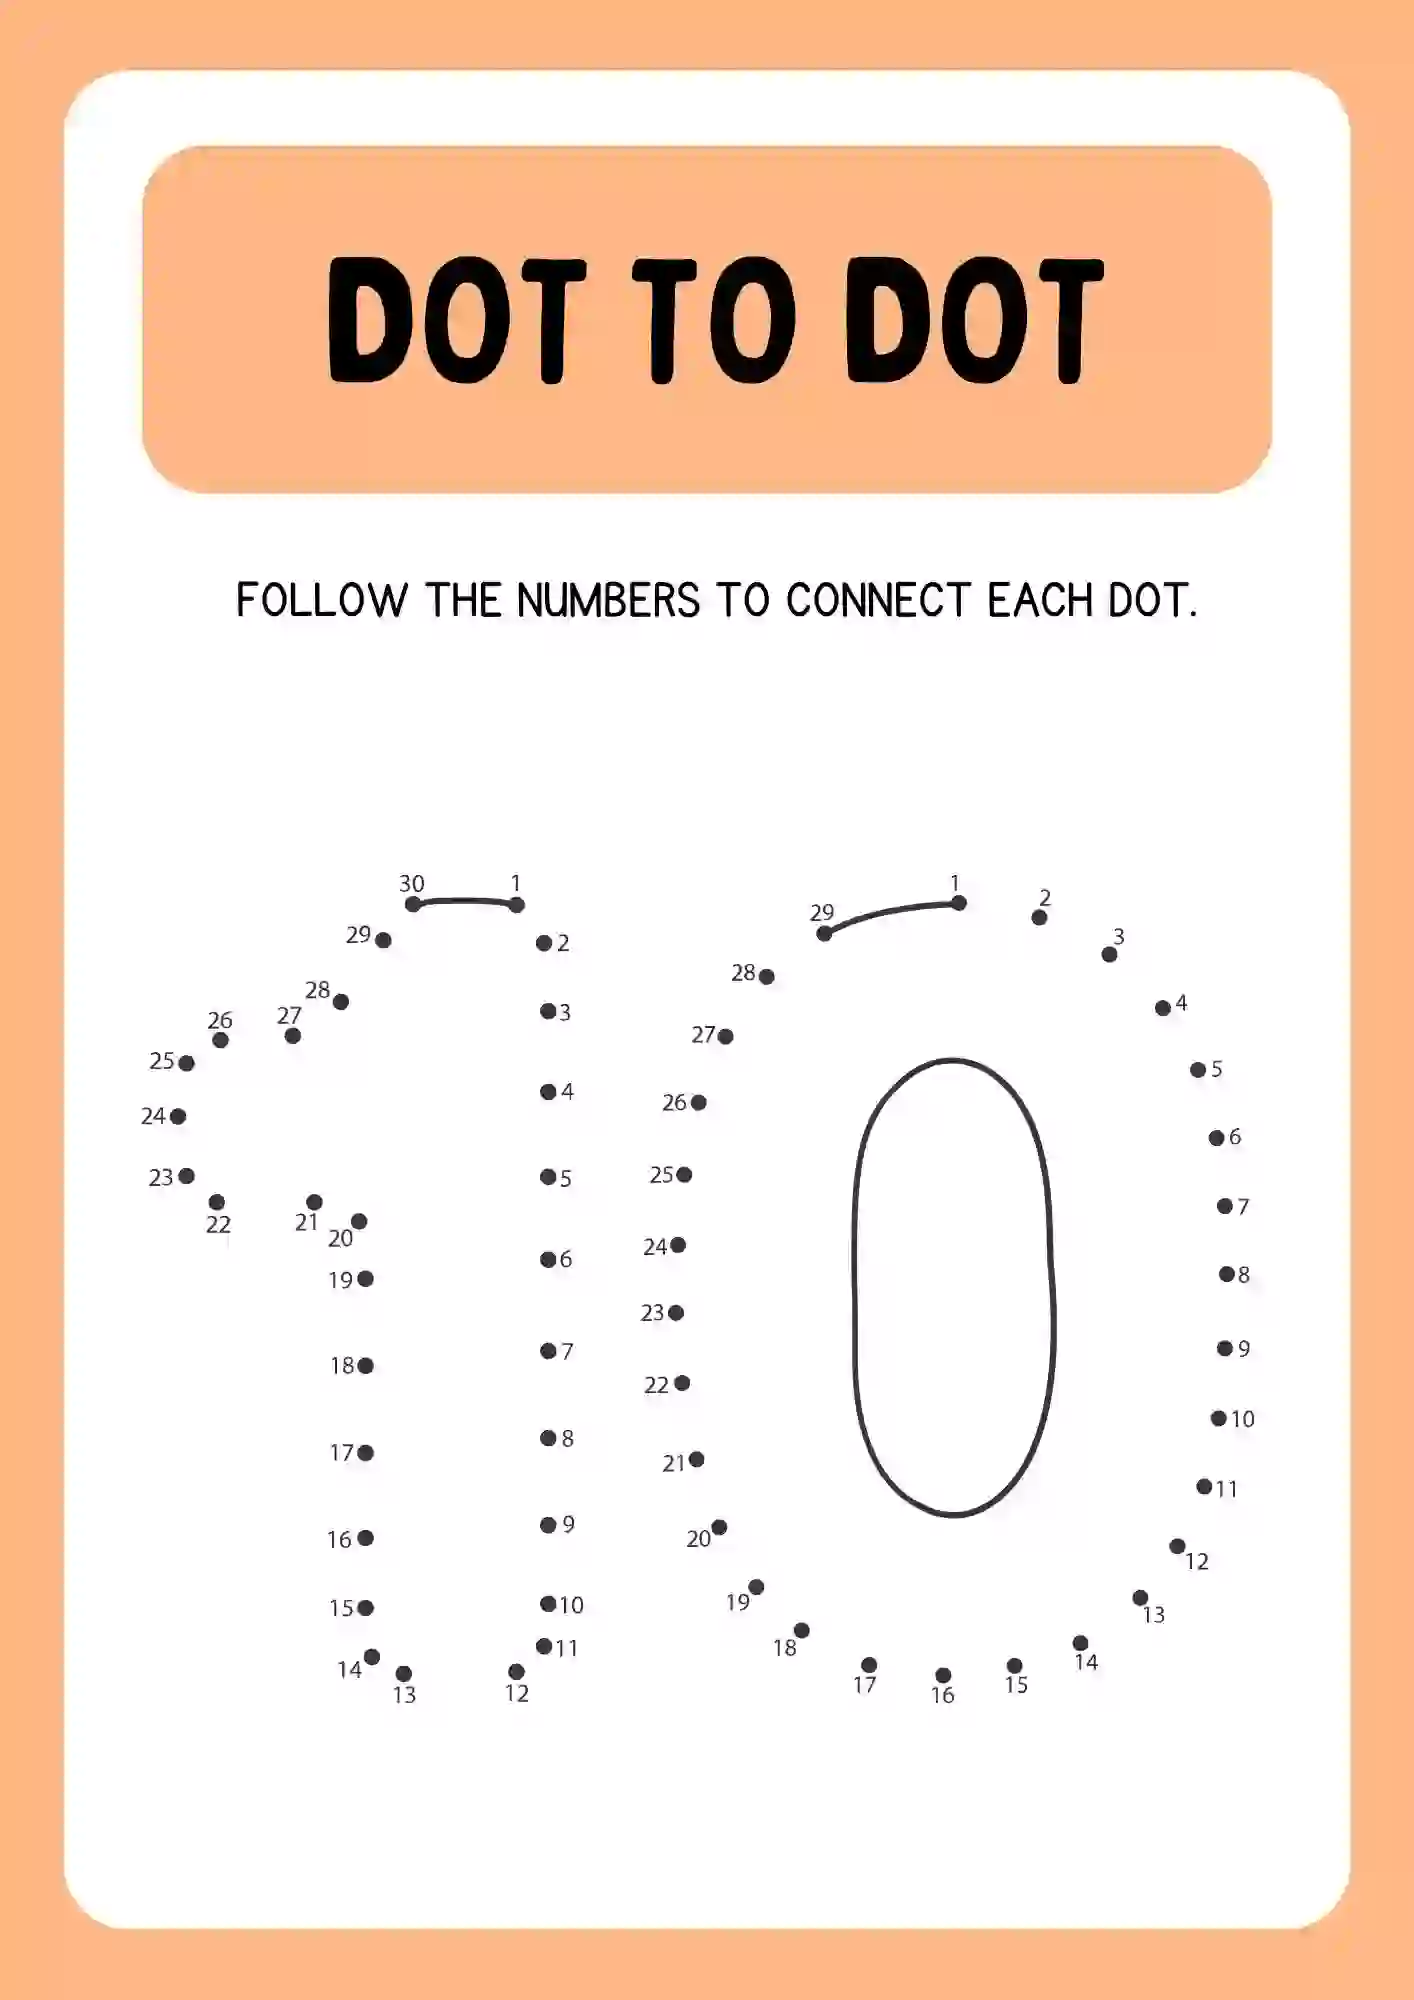 Dot to Dot Connecting Numbers Activity Worksheets number 10-